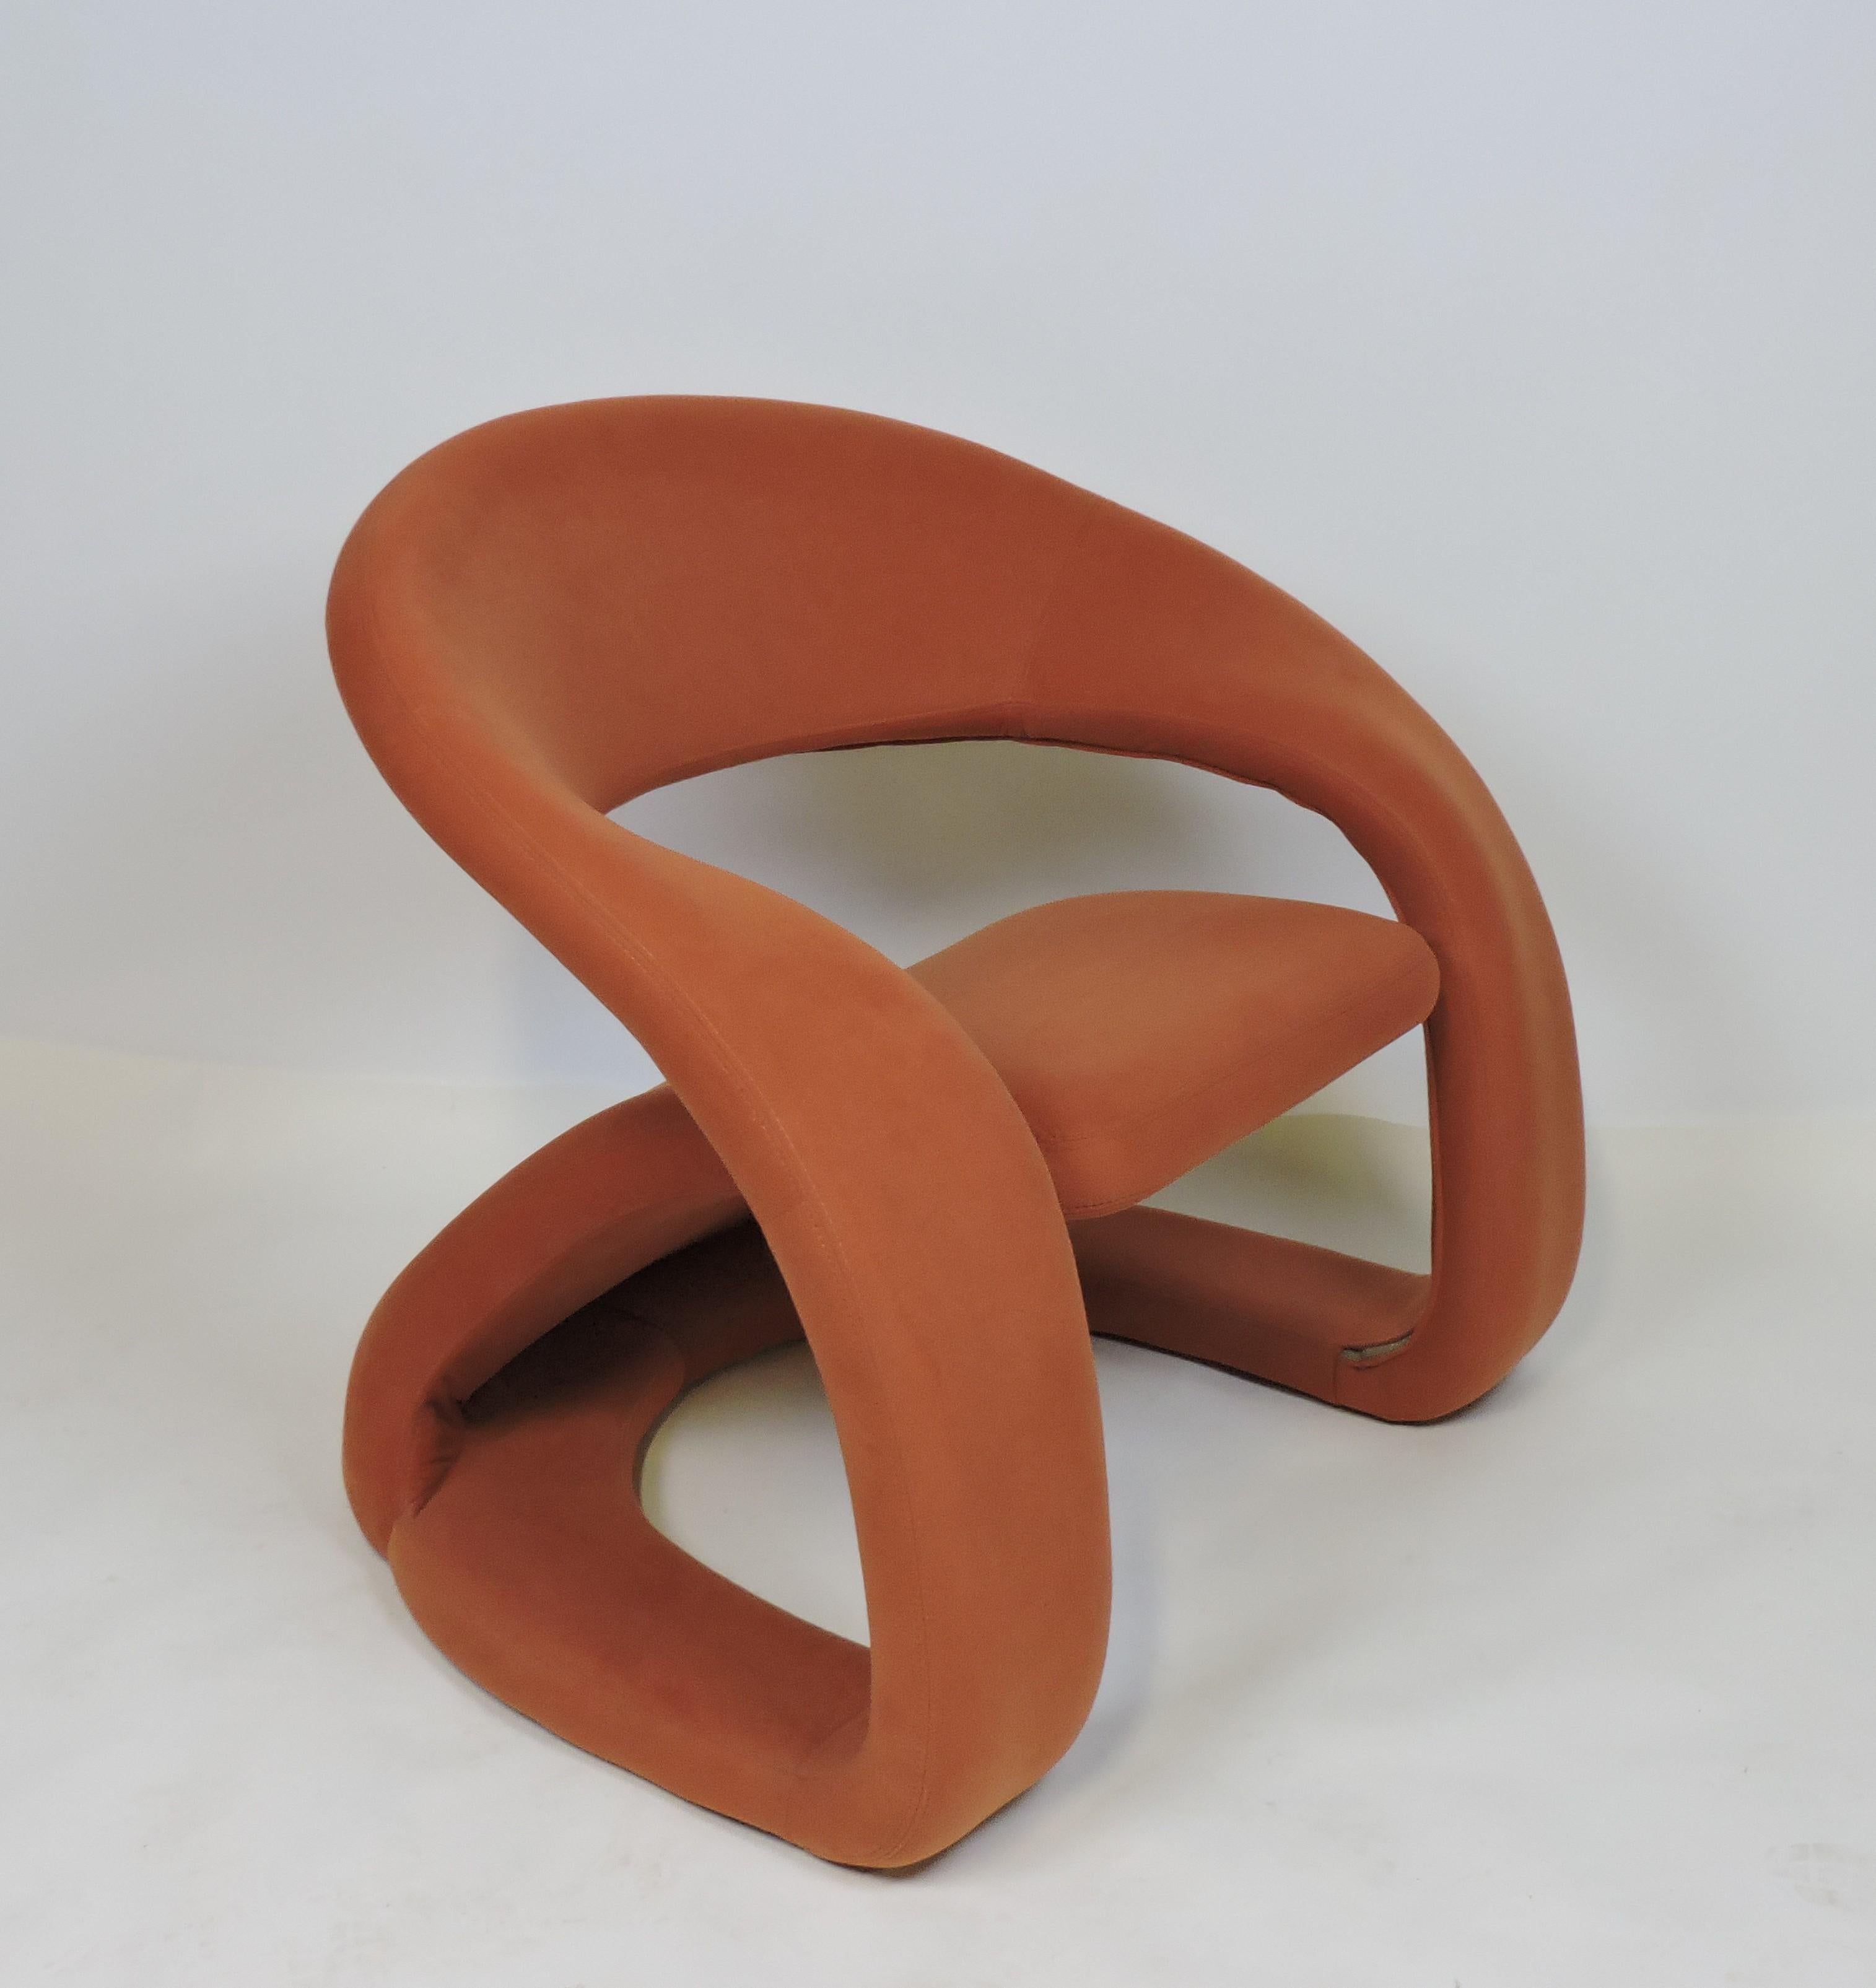 Very cool looking and comfortable lounge chair manufactured in Quebec by Jaymar. This chair has a unique and curvy sculptural design and is upholstered in the original burnt orange colored micro suede upholstery.